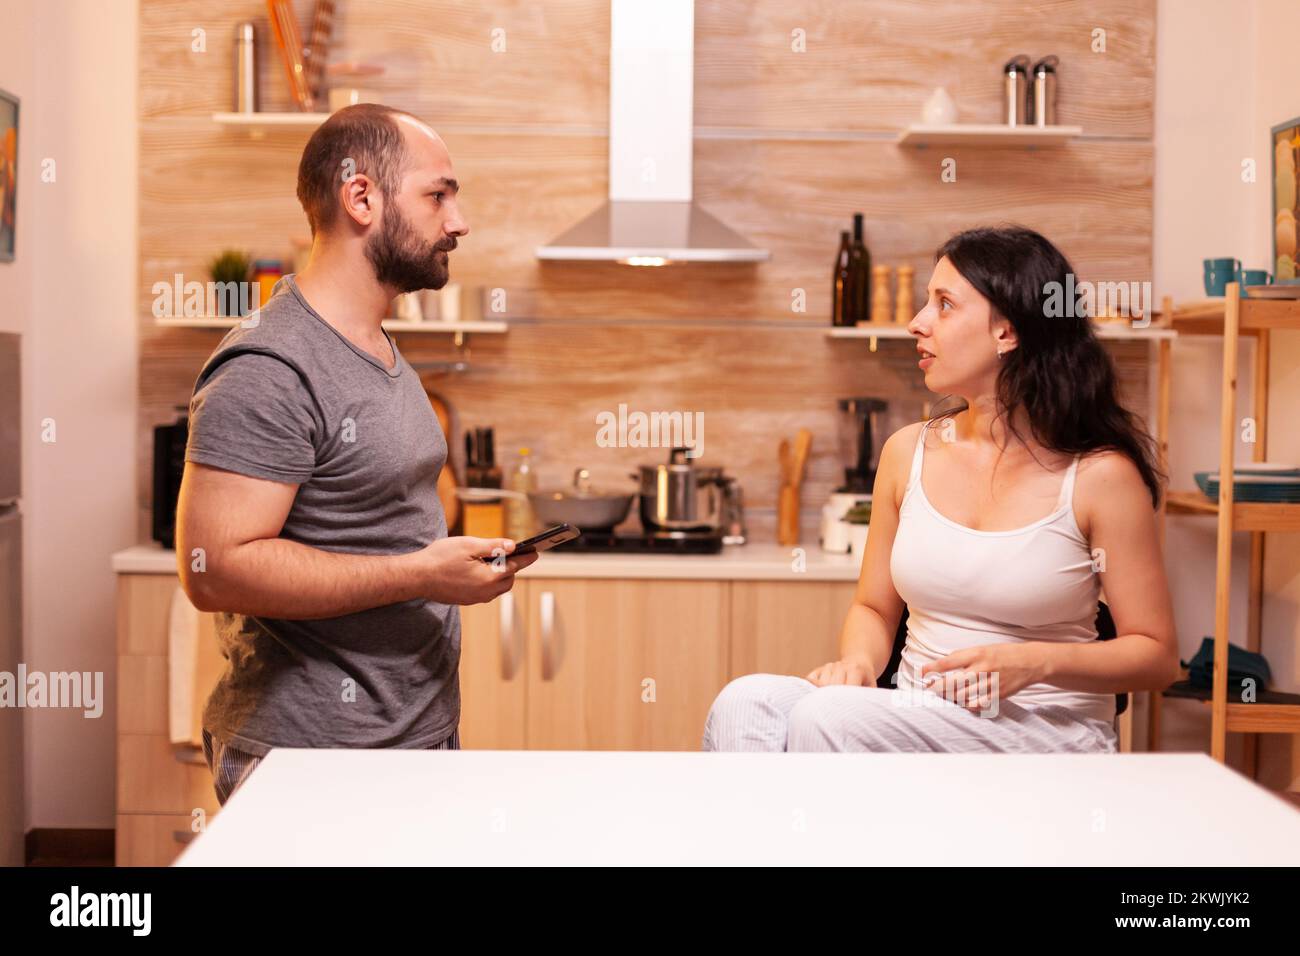 Angry husband confronting cheating wife about infidelity while holding her phone. Frustrated offended irritated accusing woman of infidelity arguing her. Stock Photo